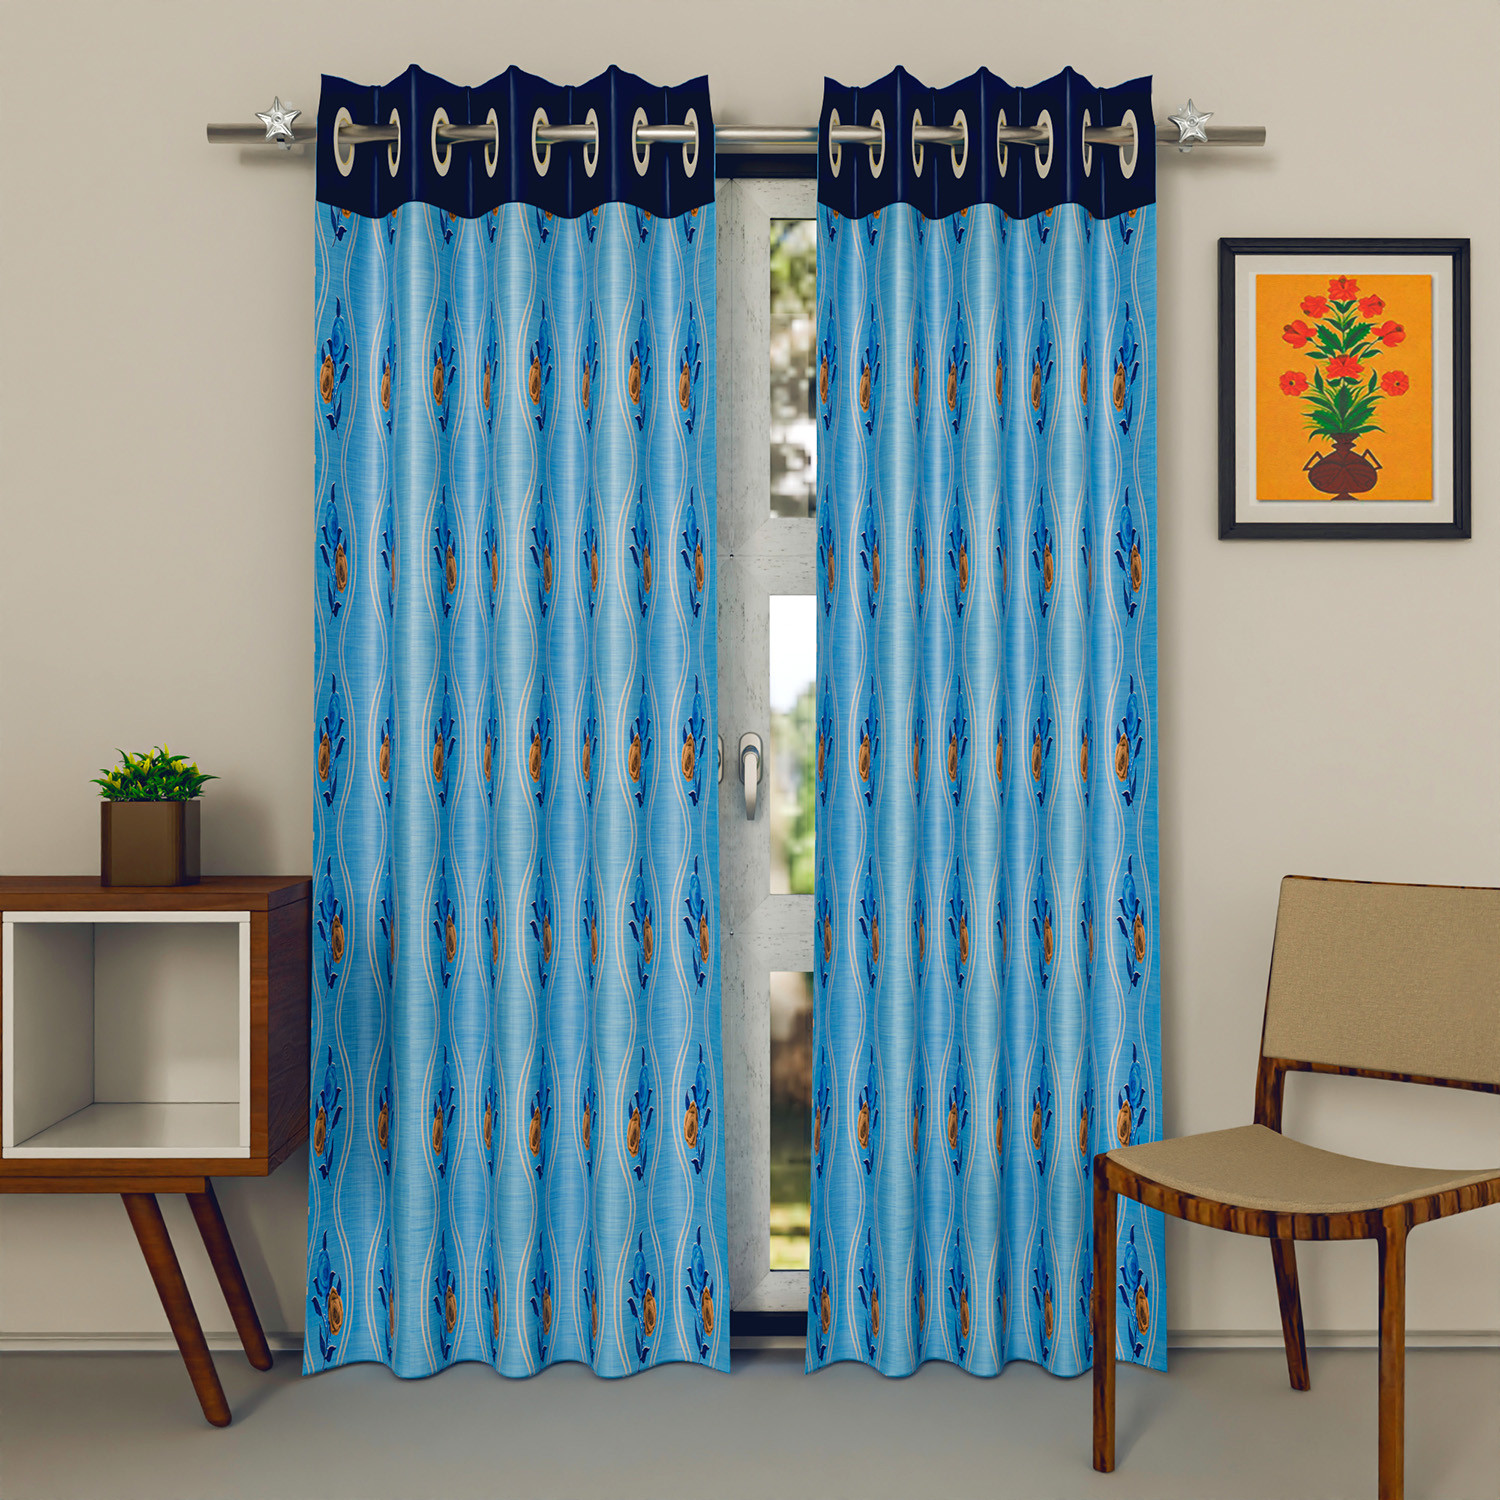 Kuber Industries Polyester Decorative 9 Feet Long Door Curtain | Rose Print Blackout Drapes Curtain With 8 Eyelet For Home & Office (Blue)